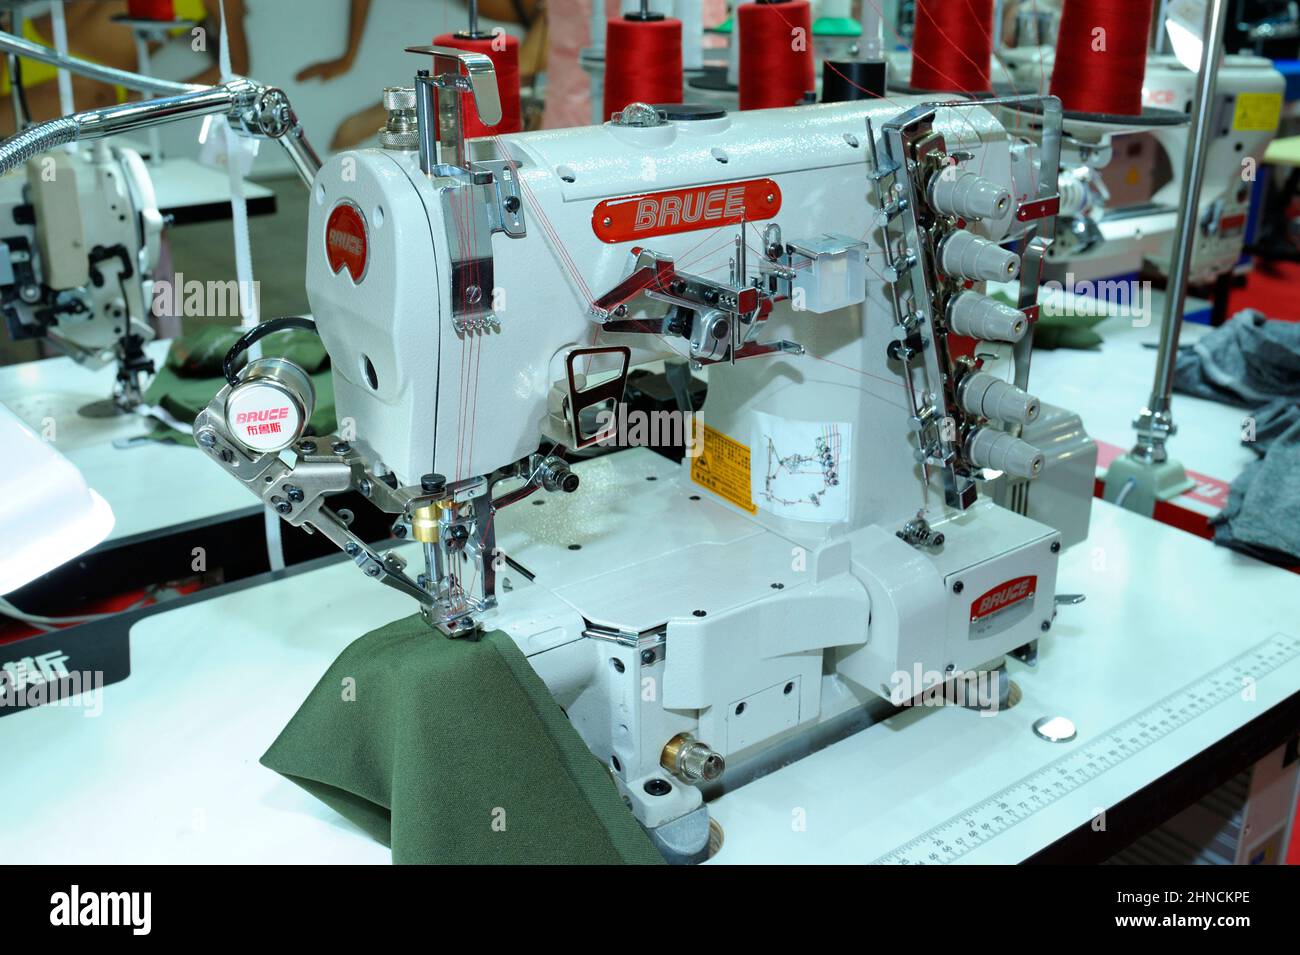 Pro electric sewing machine Bruce working on a worktable at the workshop.  February 2, 2022. Kyiv, Ukraine Stock Photo - Alamy